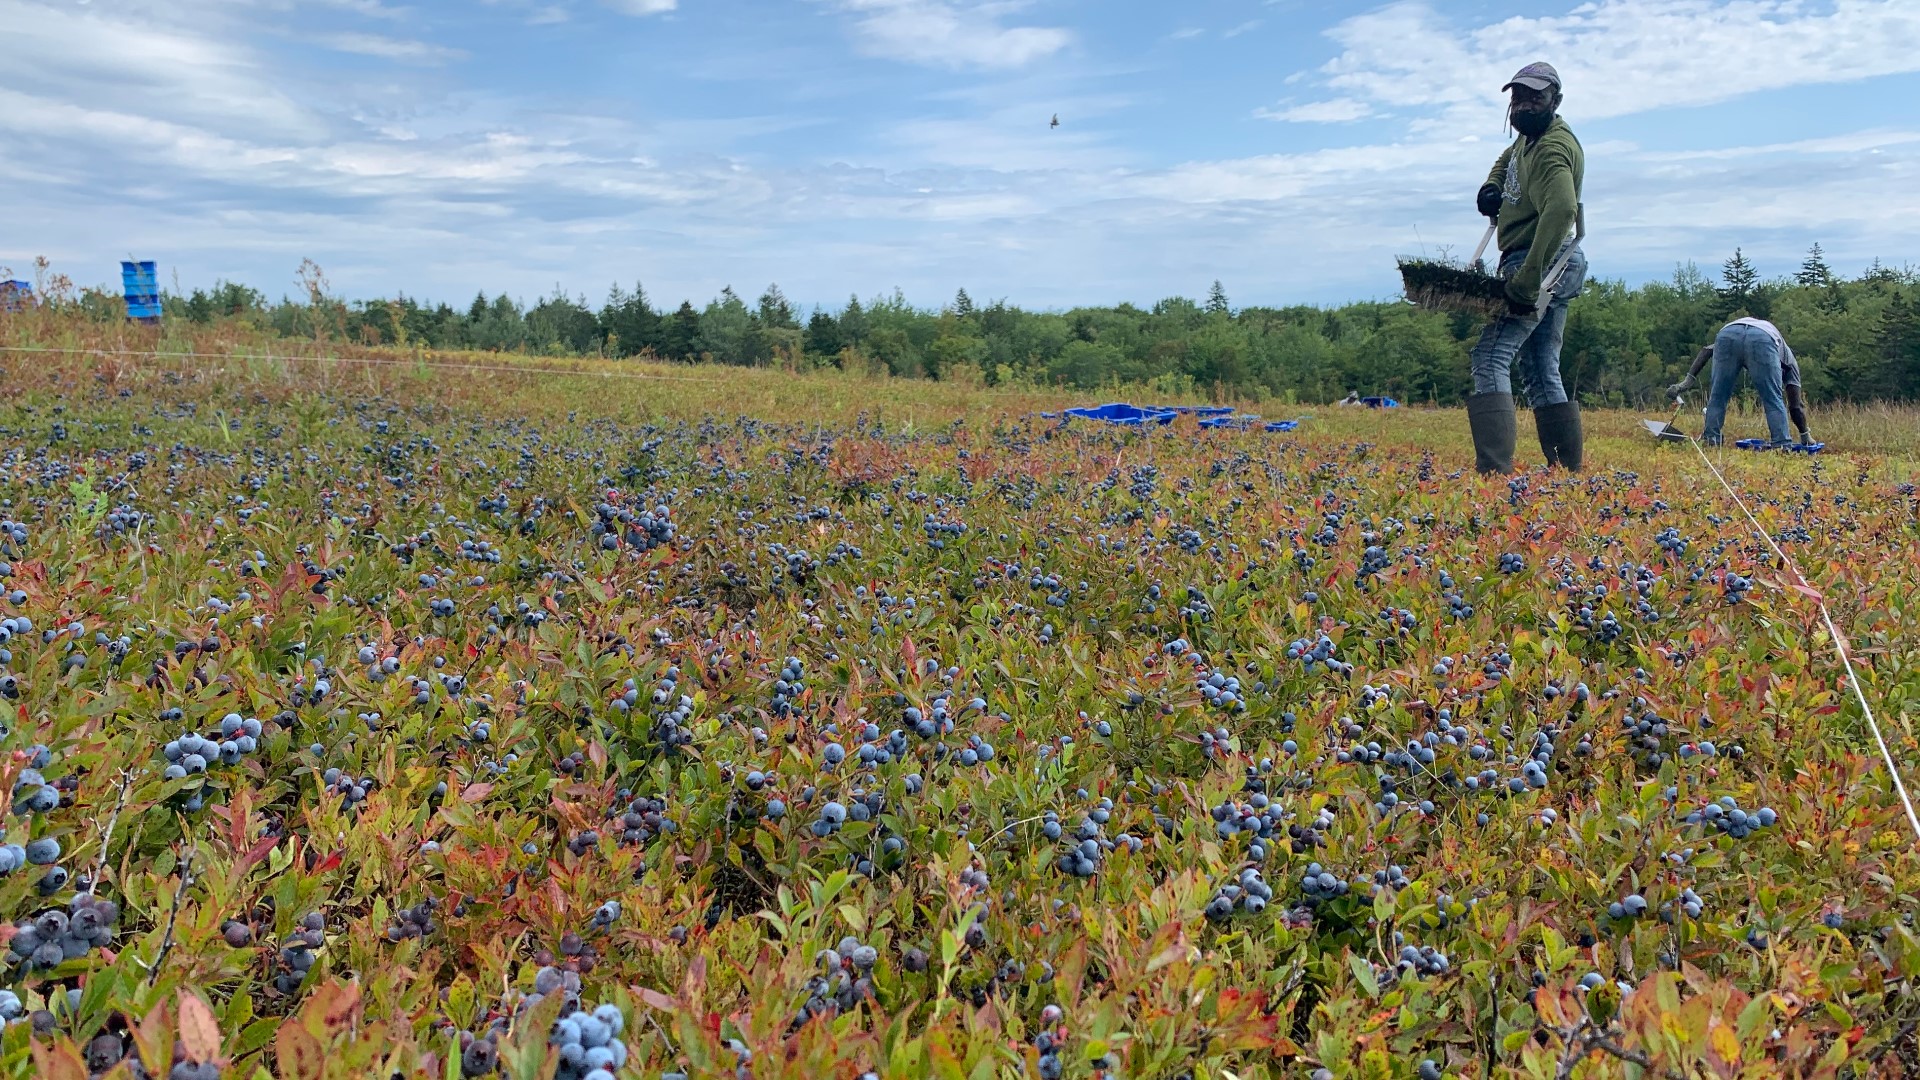 Growers are facing no choice but to adapt to a changing growing season in Downeast Maine.